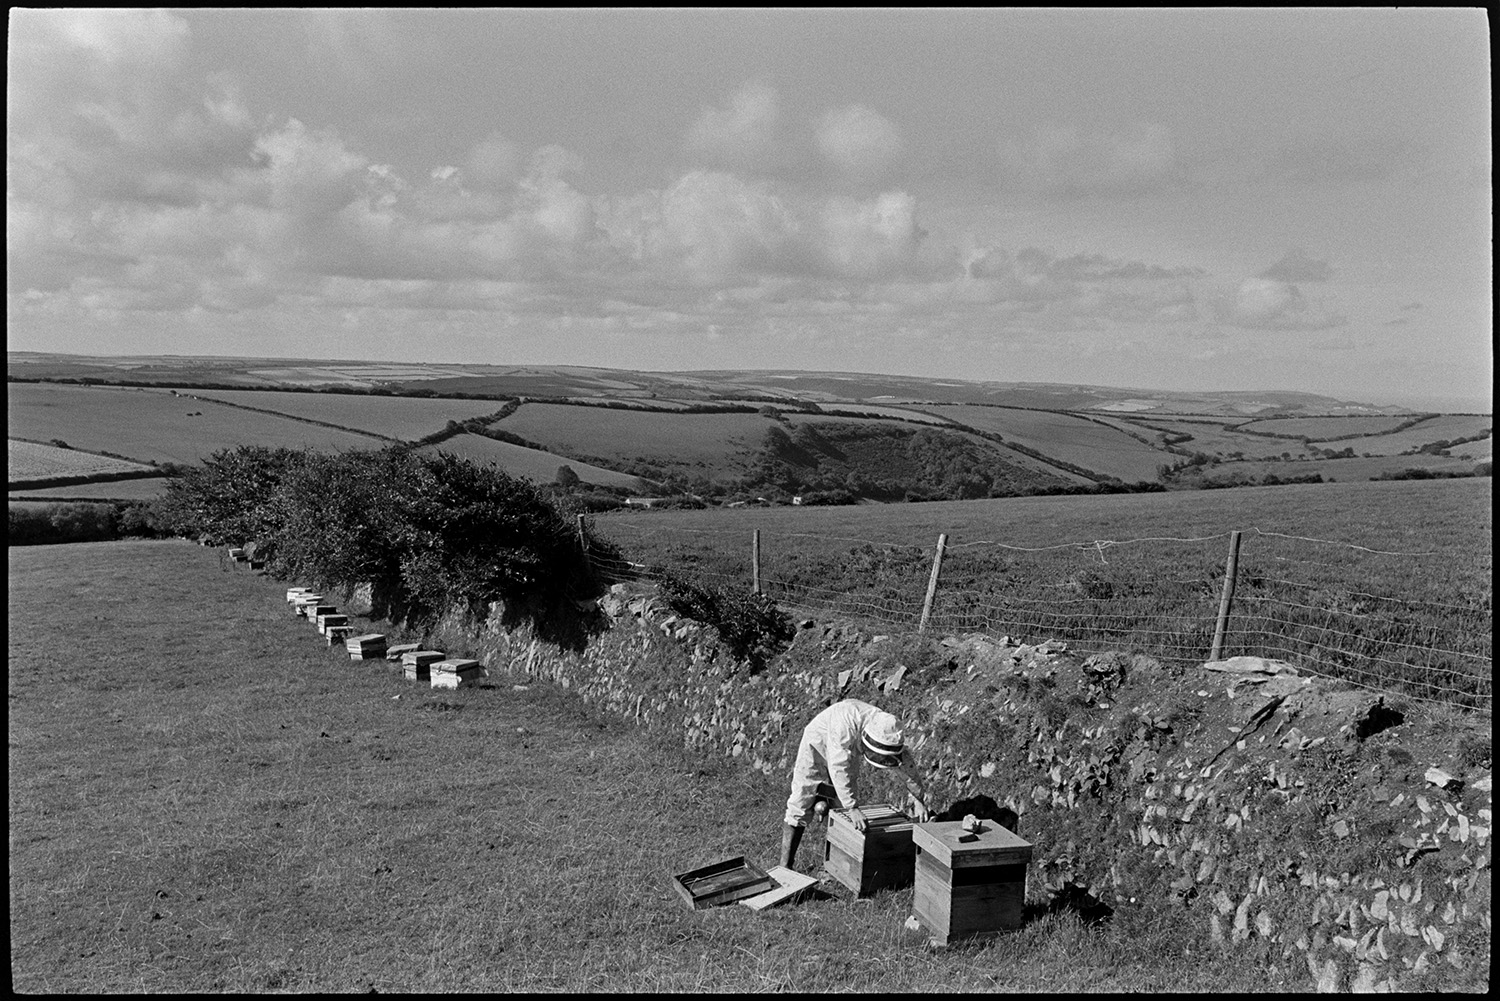 Man tending bees in hives in moorland landscape. 
[Bill Ludgate checking a bee hive by a stone wall in a field near Woody Bay. Other hives can be seen along the wall and a landscape of fields and hedgerows is visible in the background.]